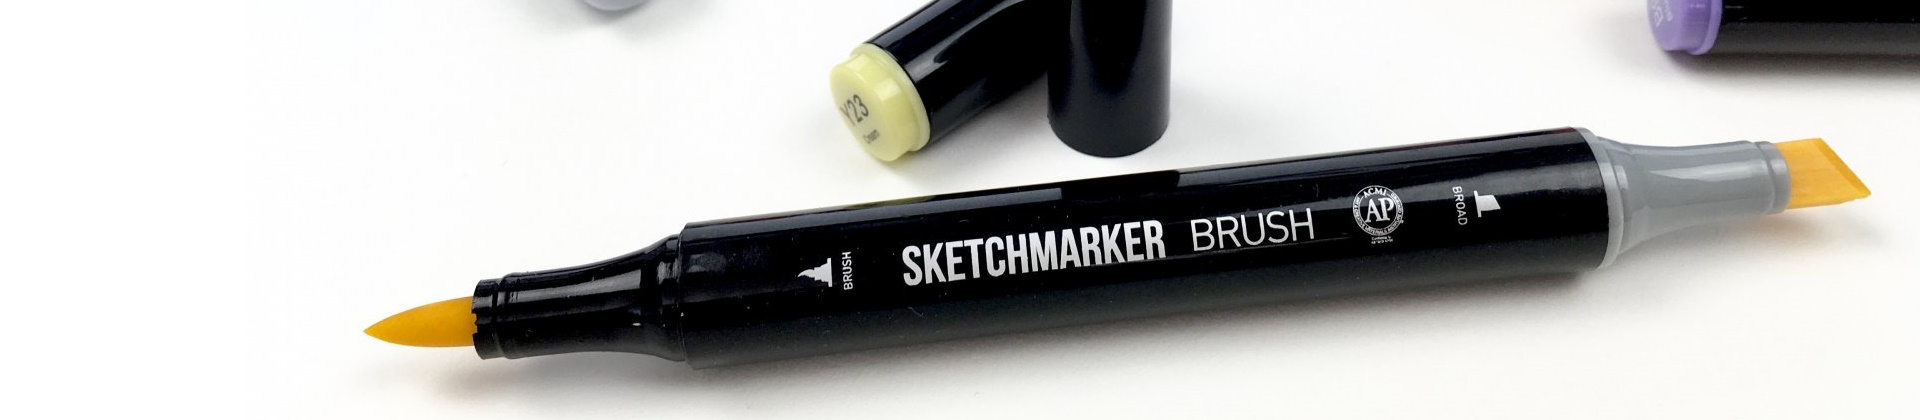 Маркери SKETCHMARKER поштучно